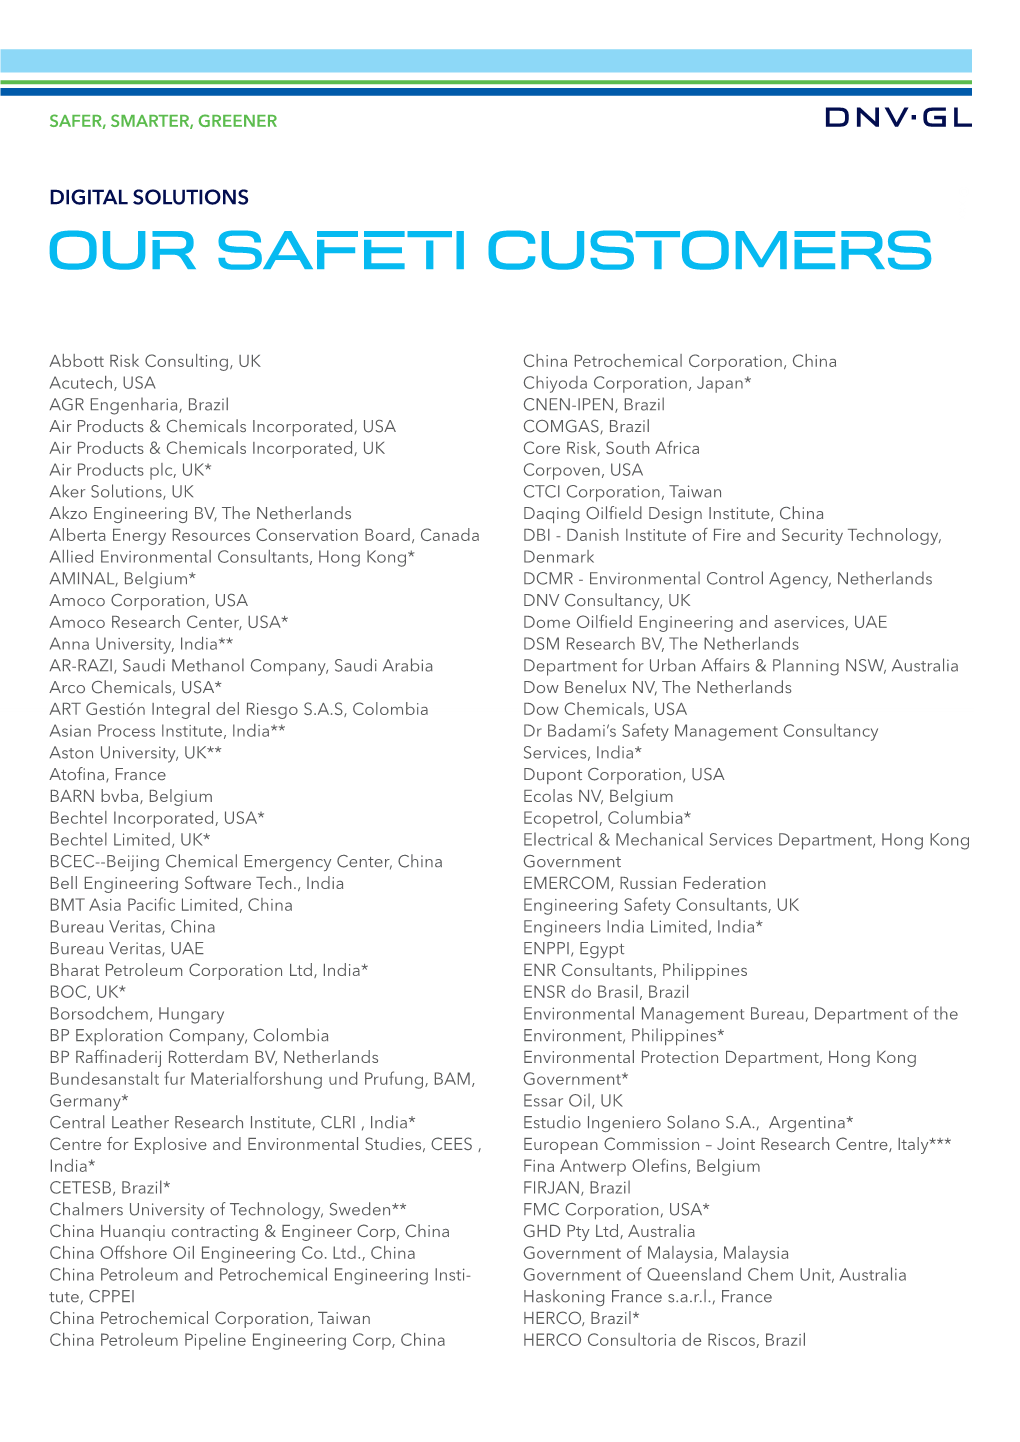 Our Safeti Customers